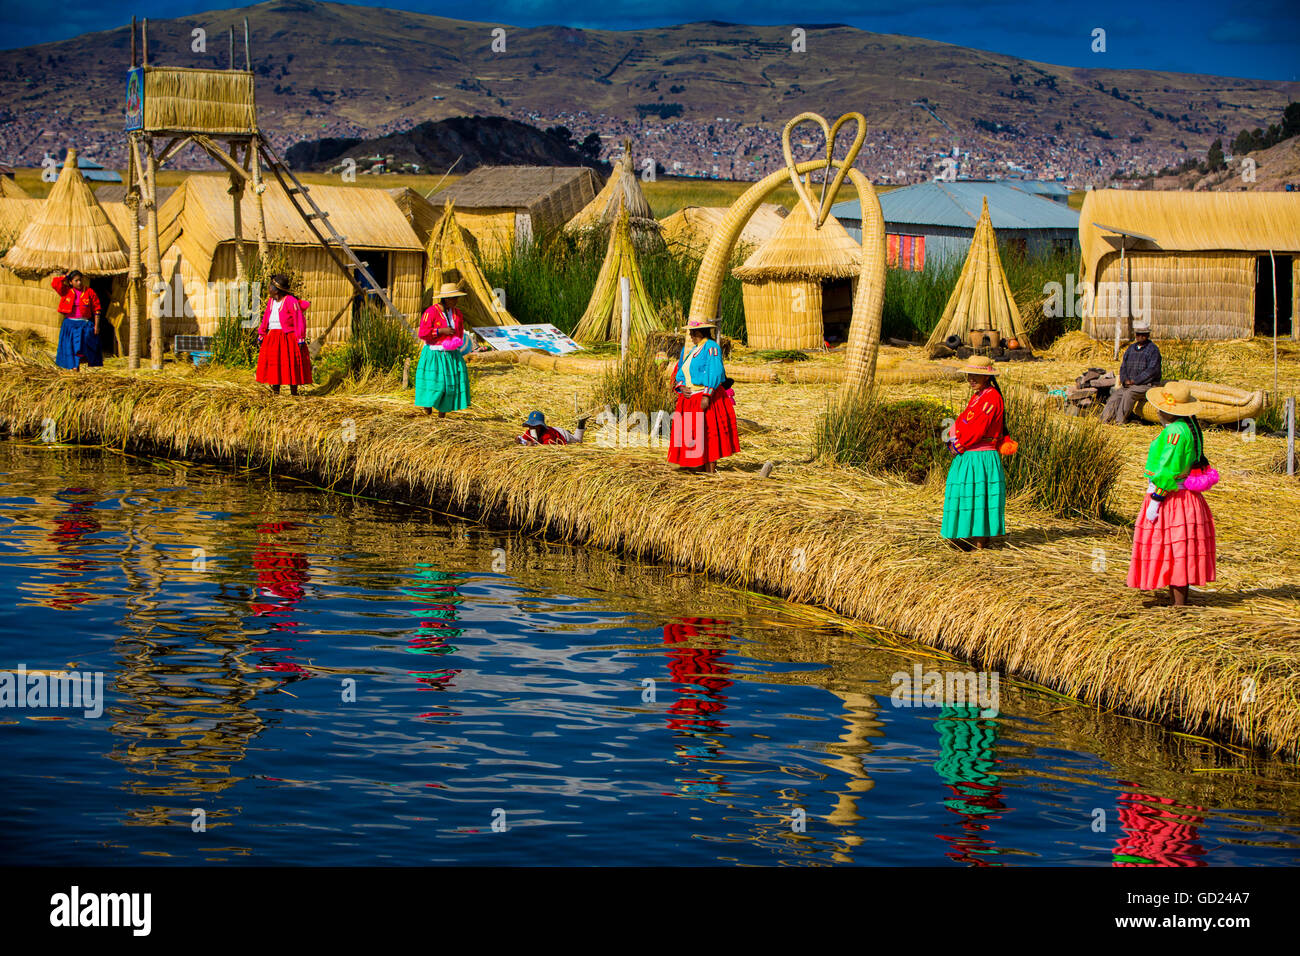 Quechua Indian family on Floating Grass islands of Uros, Lake Titicaca, Peru, South America Stock Photo